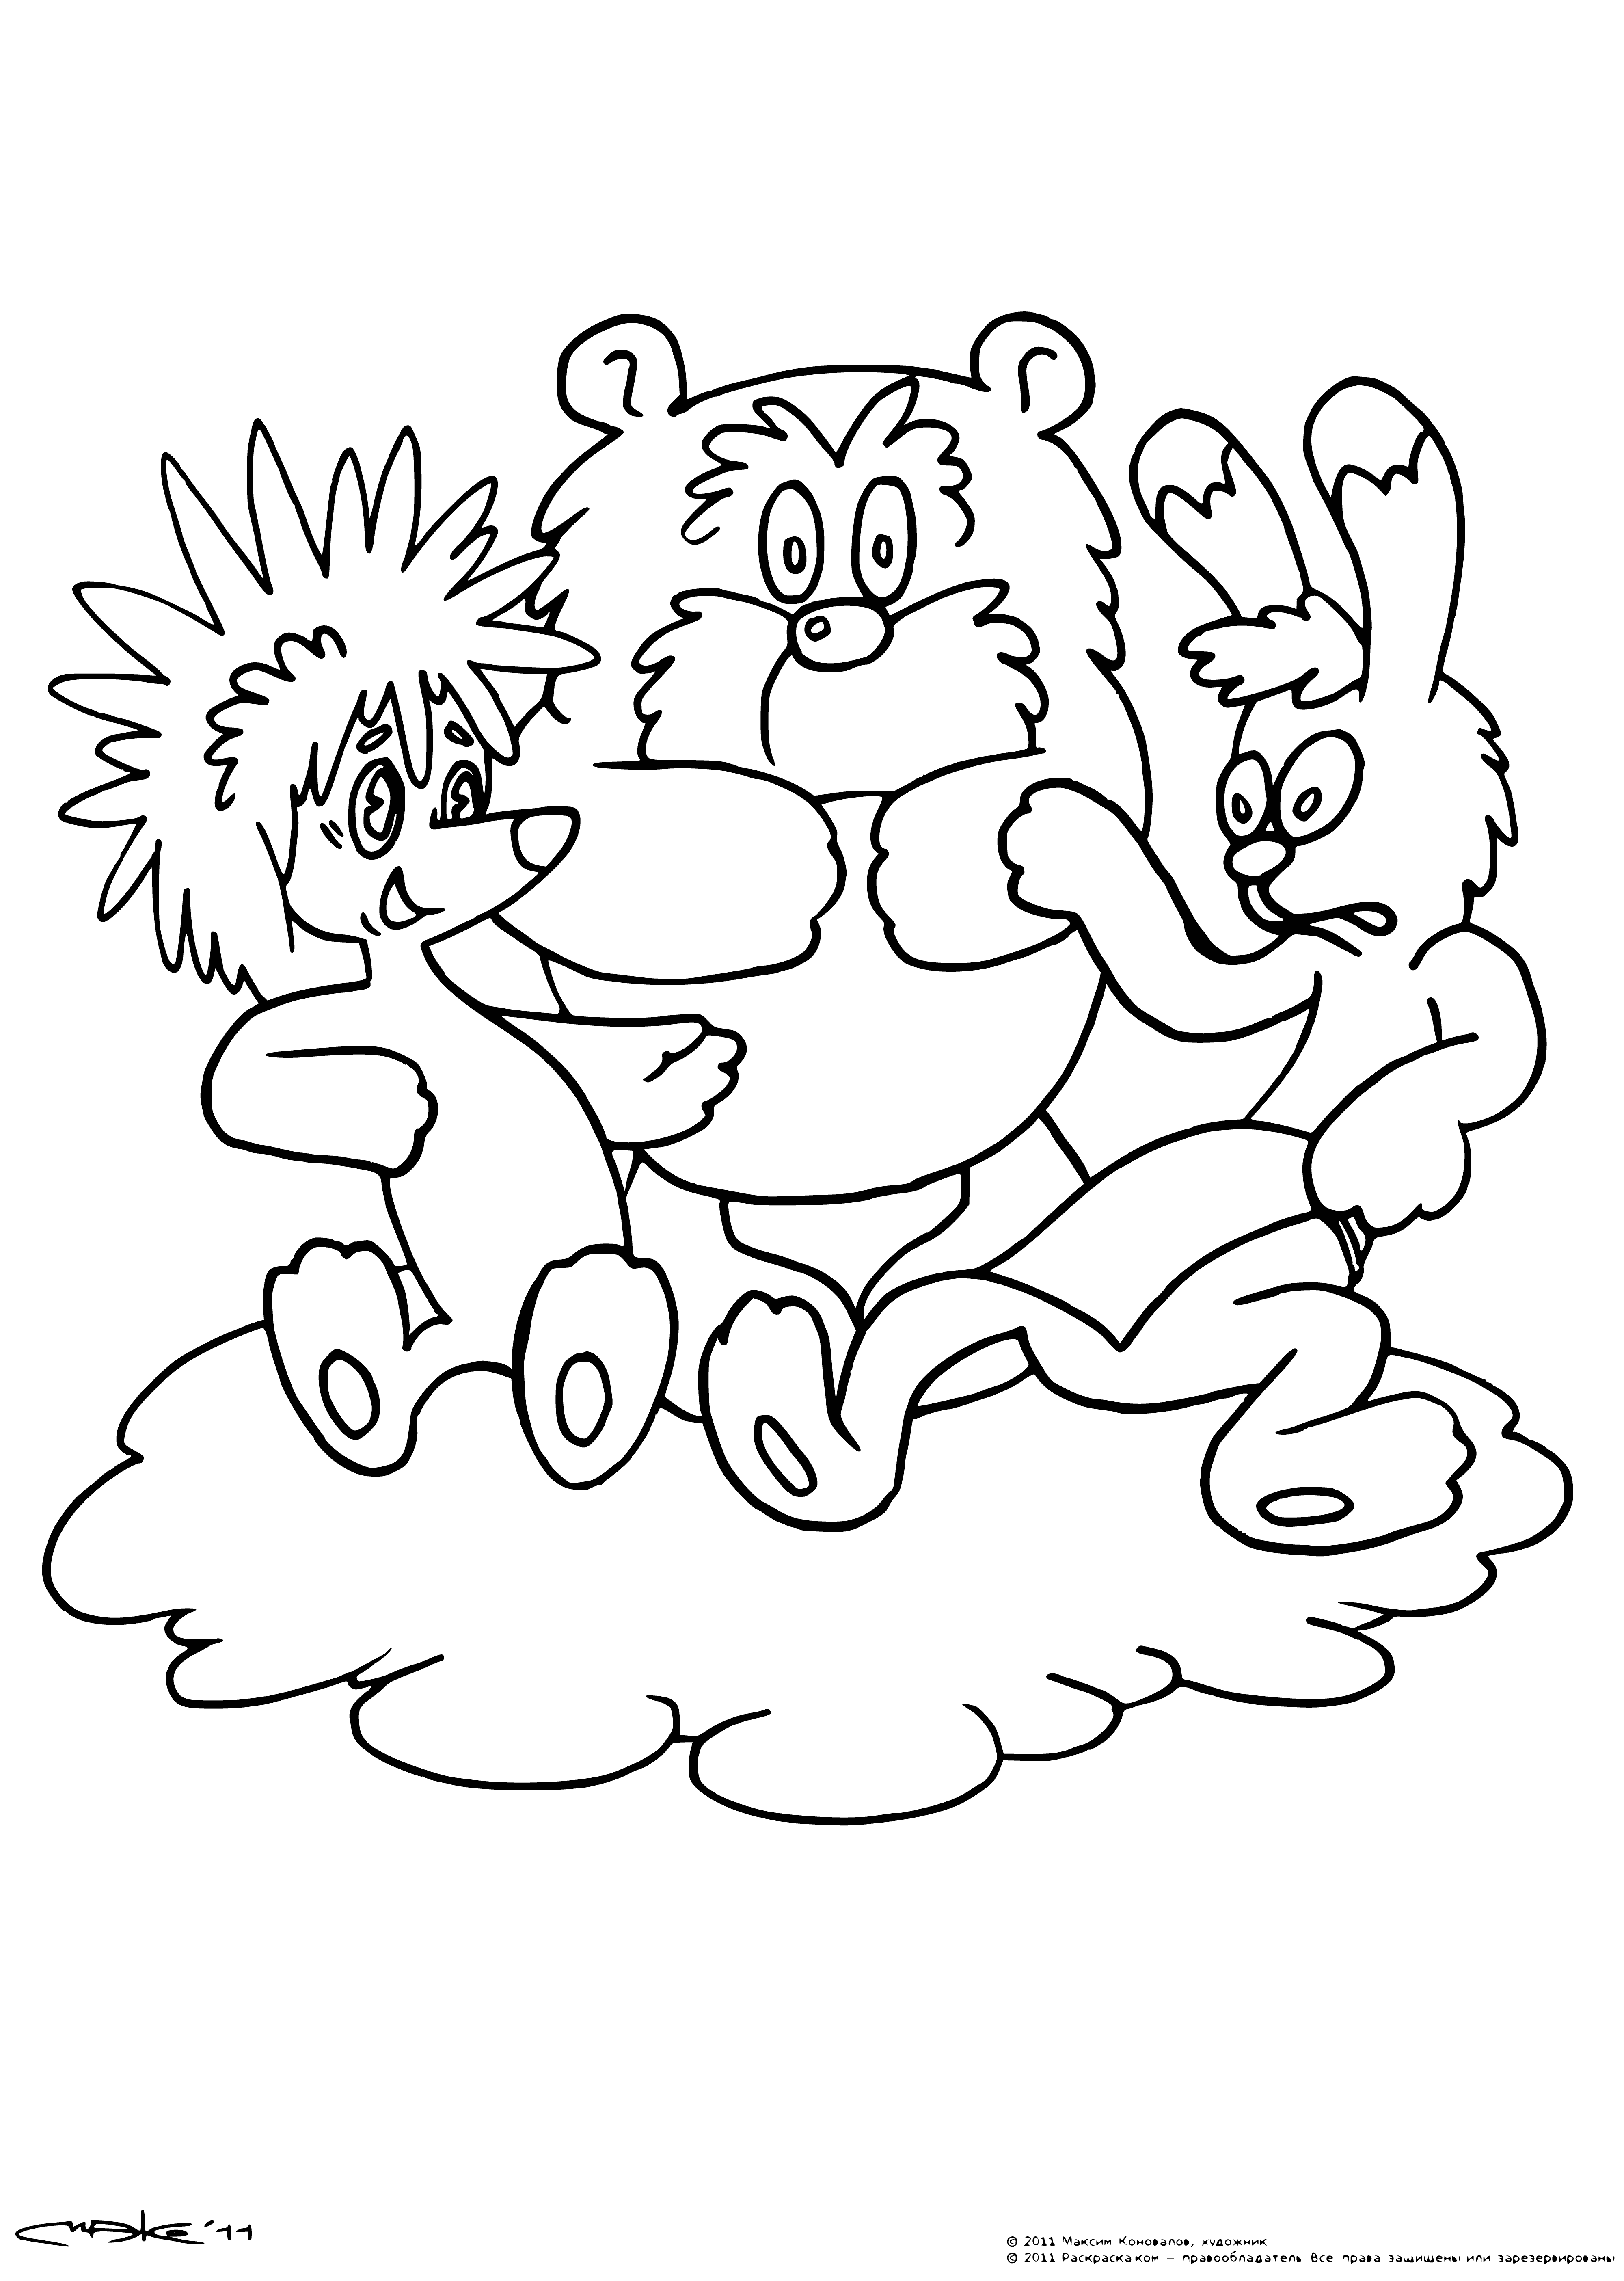 coloring page: Three animals - hedgehog, bear and hare - sit in a field; hedgehog in the middle, bear & hare on sides - bear bigger than hedgehog, hare bigger than bear. #animals